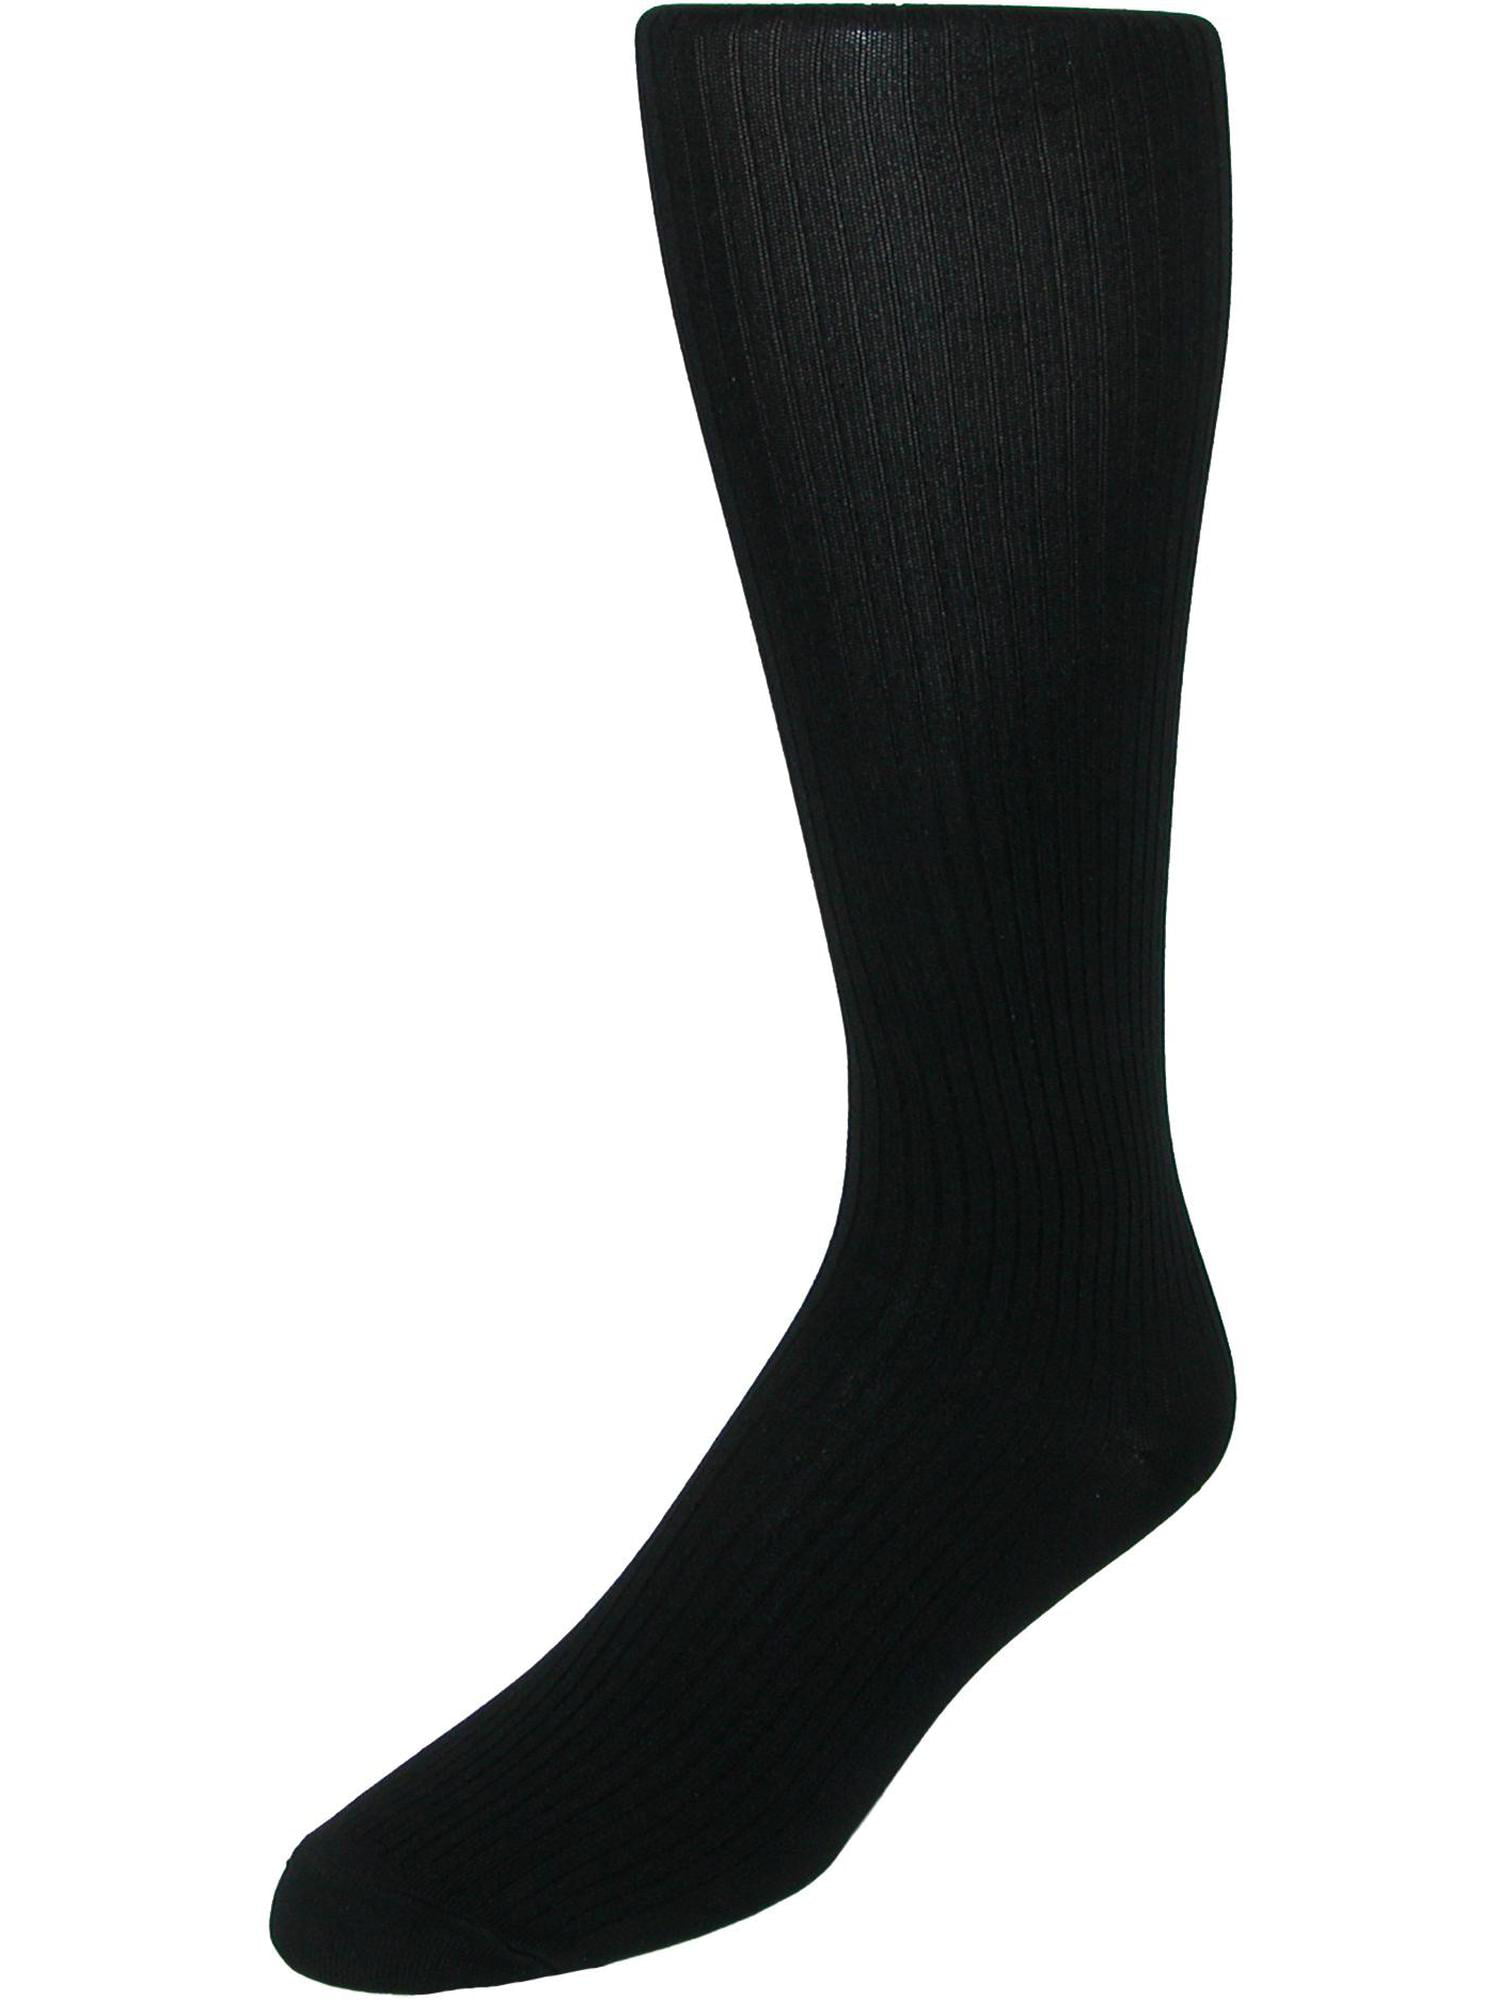 2 Pair Pack Mens Big and Tall Patterned Cotton Blend Black Dress Sock